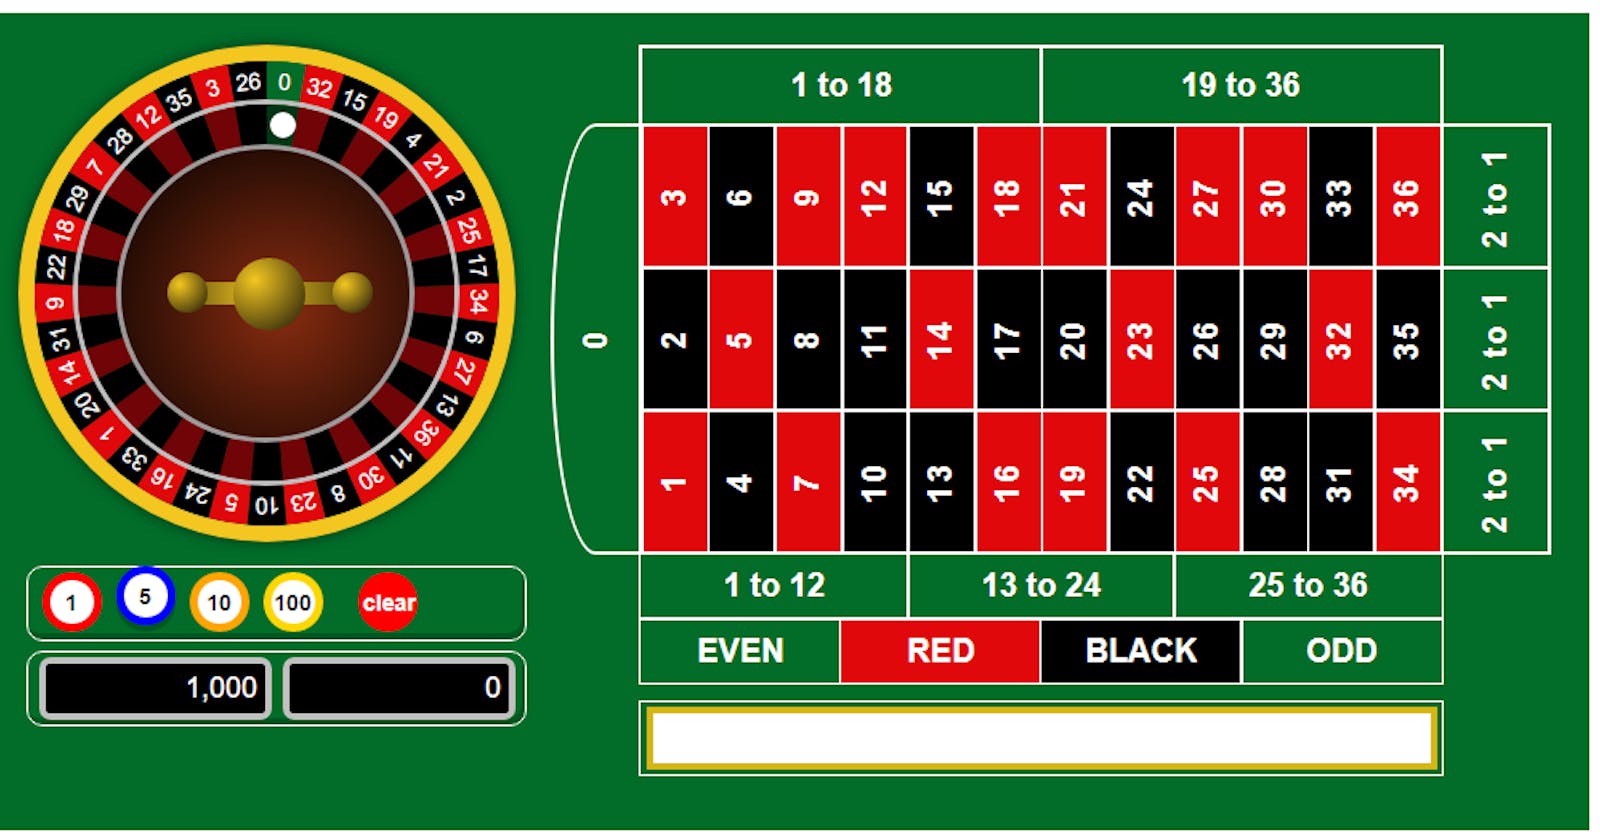 One way to make Roulette using Javascript - Part 4